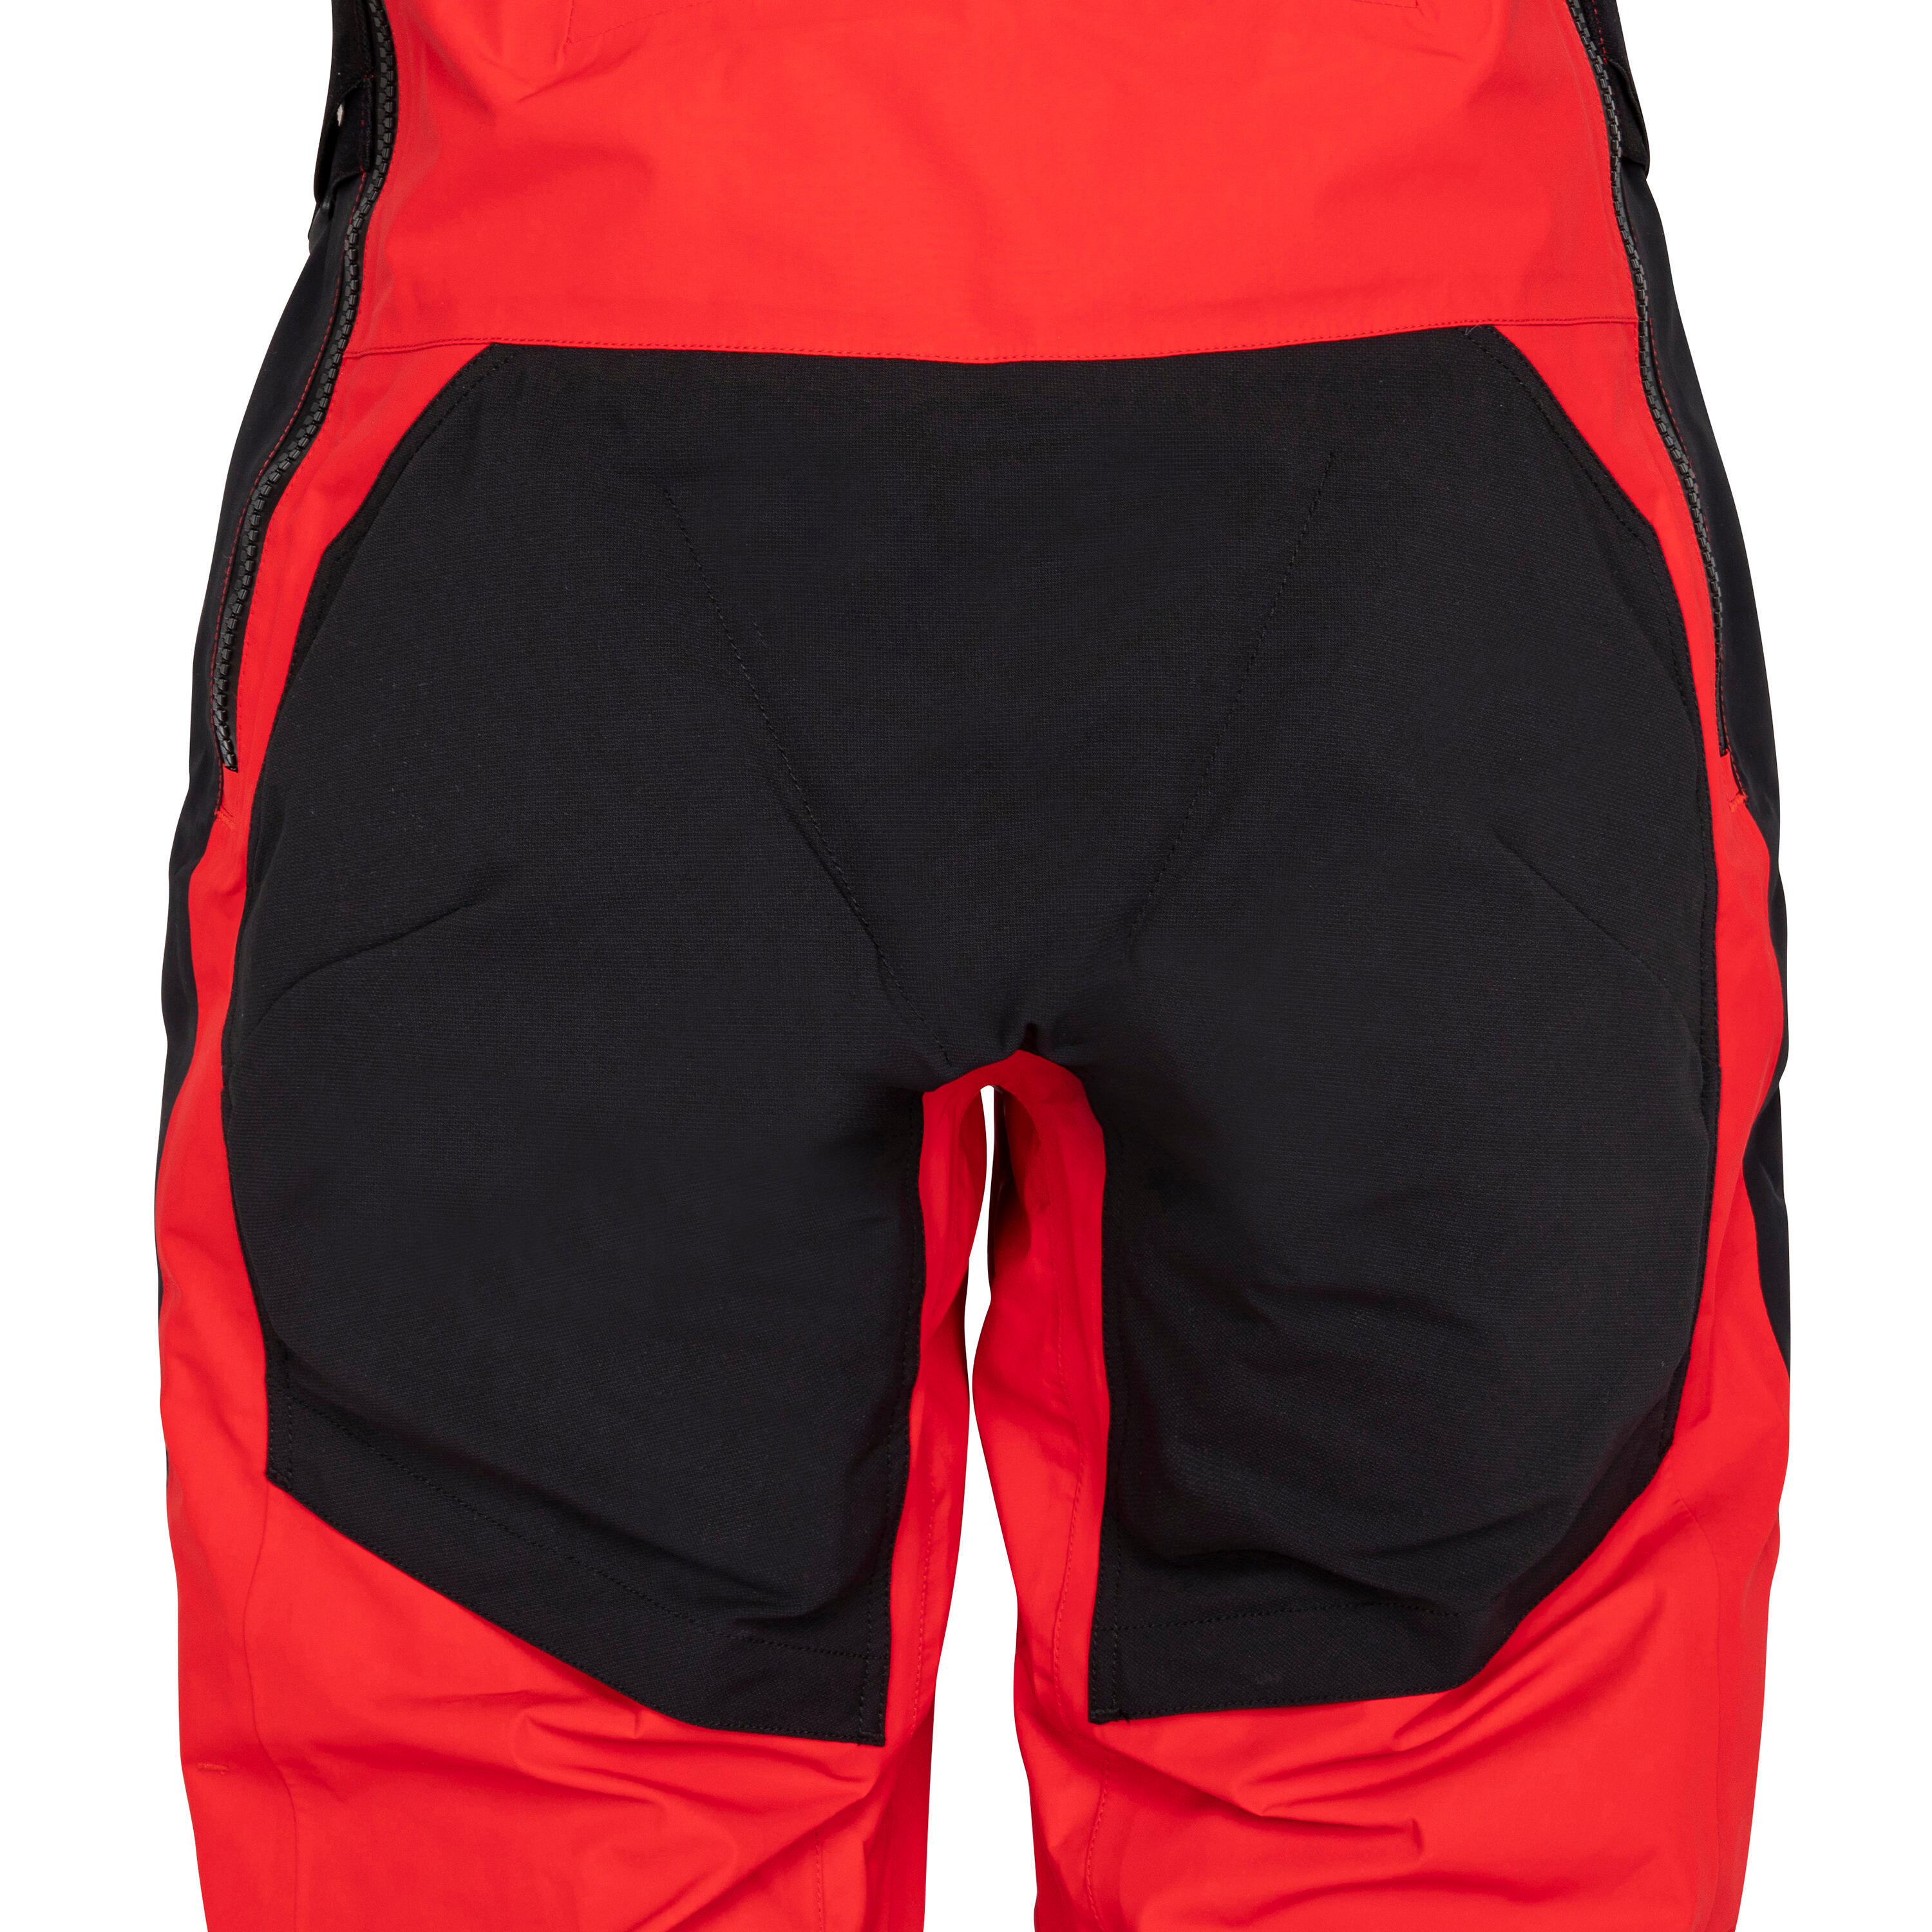 Adult Sailing overalls - Offshore 900 OPEN dropseat red 6/16